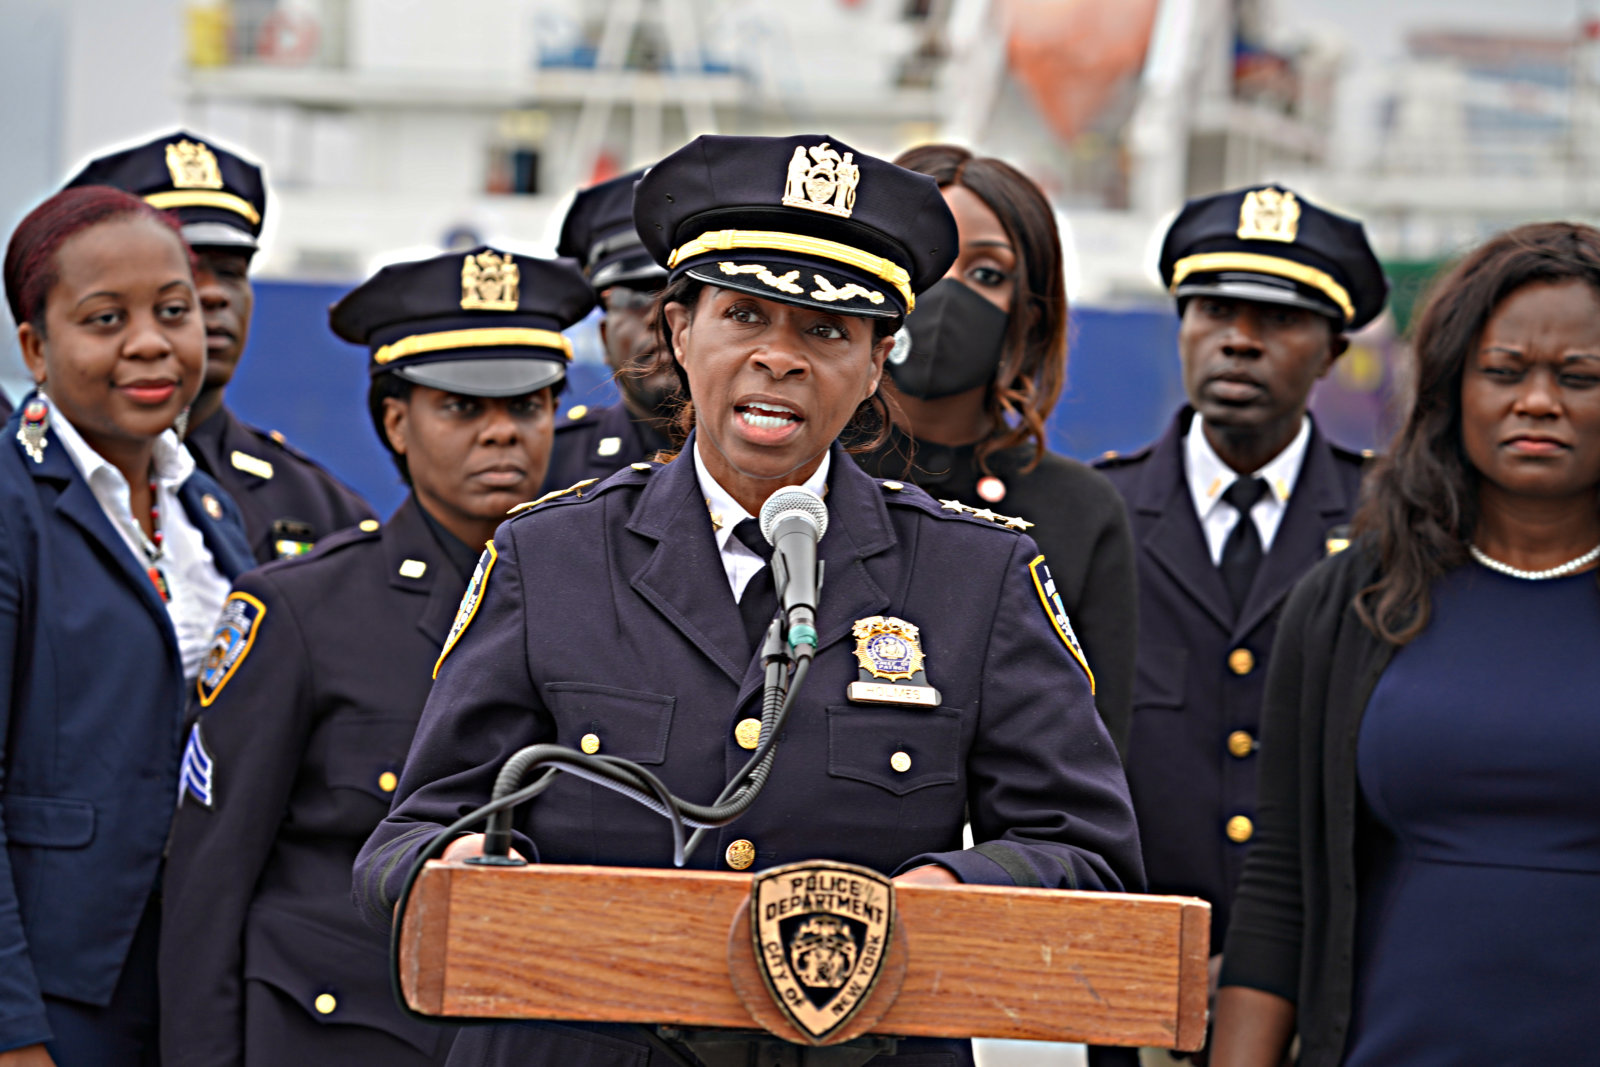 Answering the call: NYPD ships 11 large containers full of relief ...